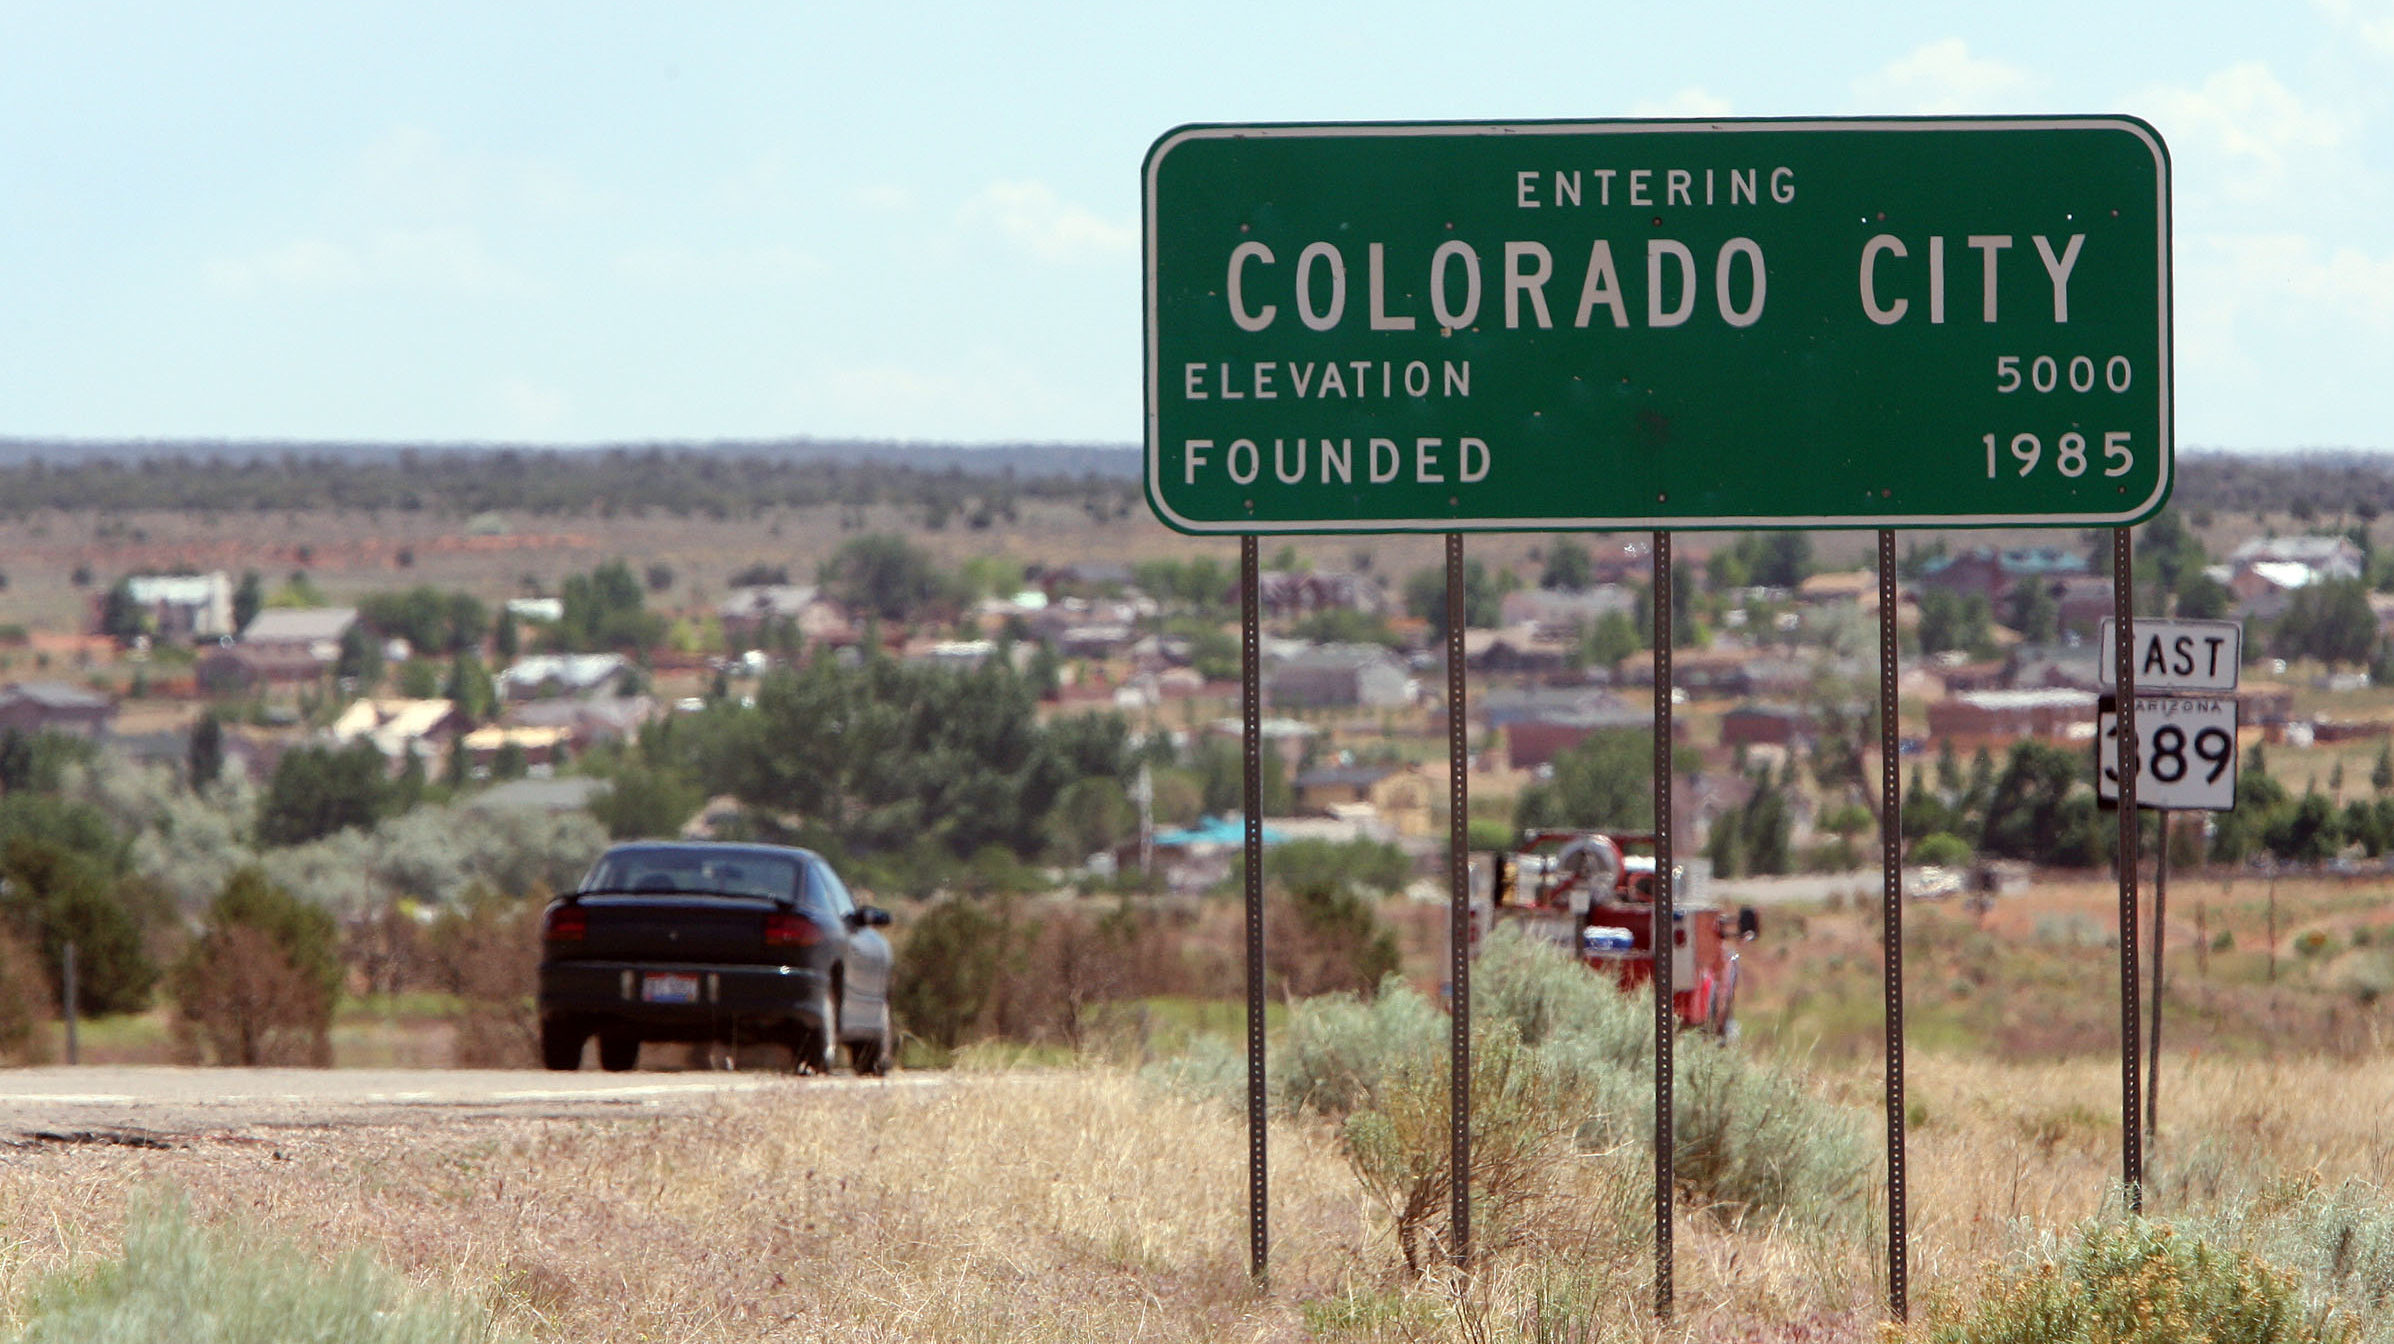 polygamist sect community colorado city town sign...